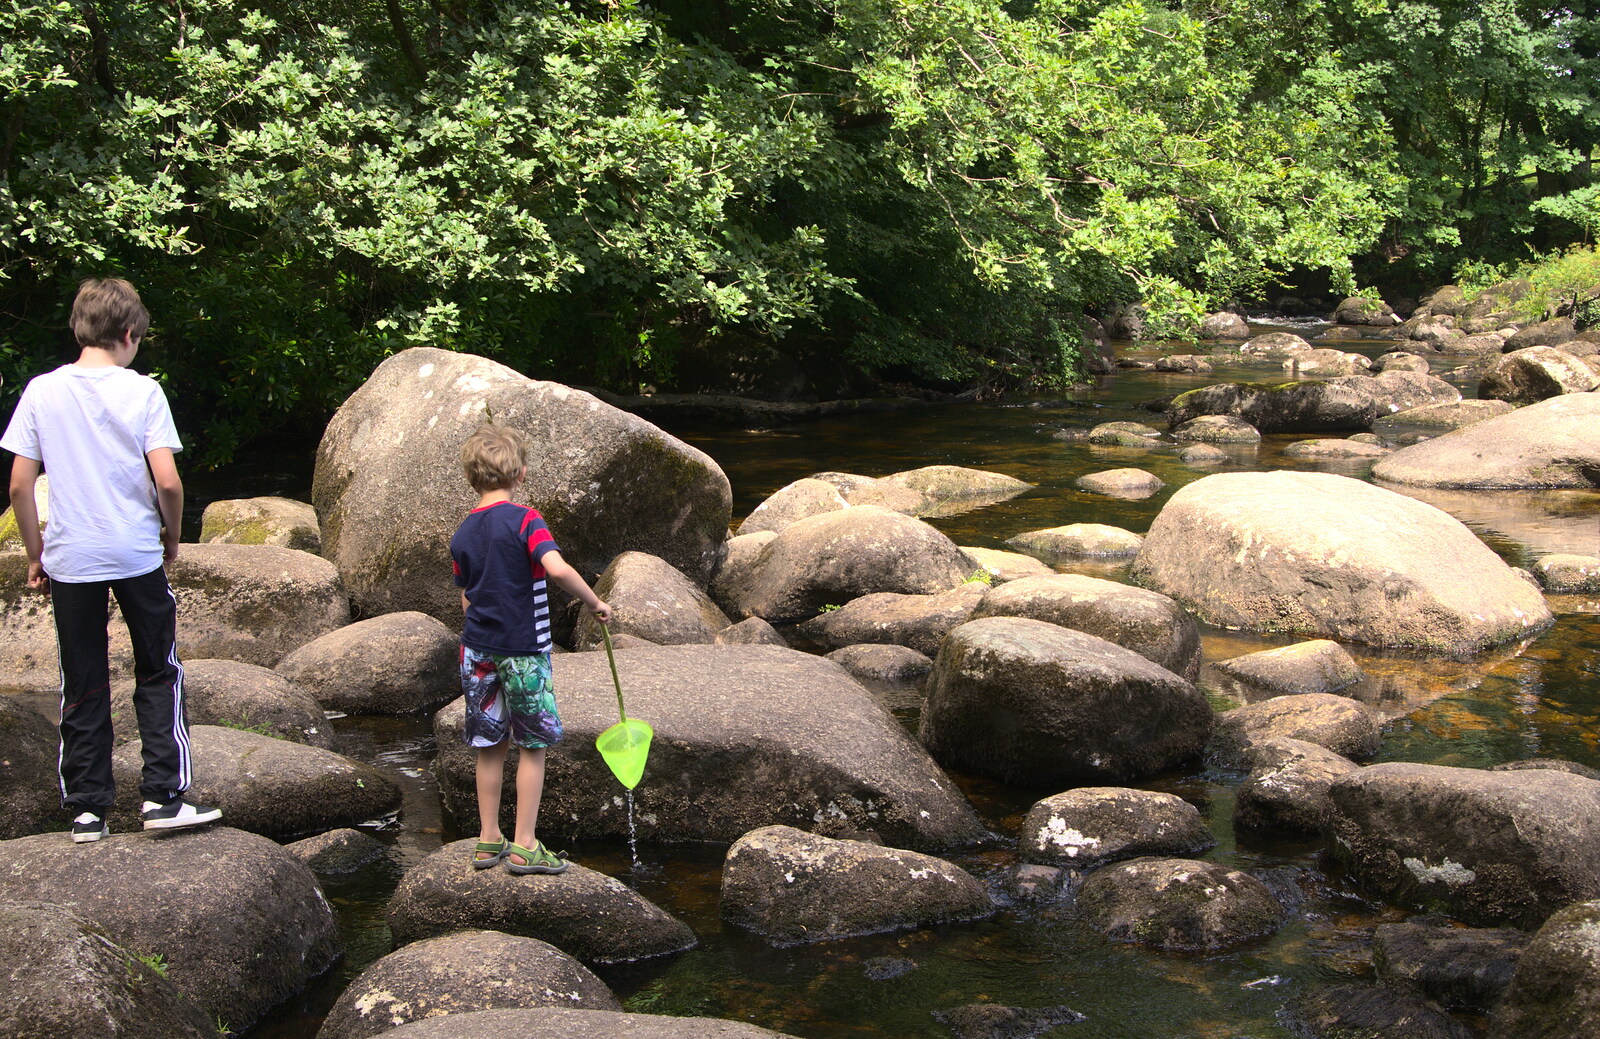 Fred fishes around with a net from Badger's Holt and Bronze-Age Grimspound, Dartmoor, Devon - 10th August 2016